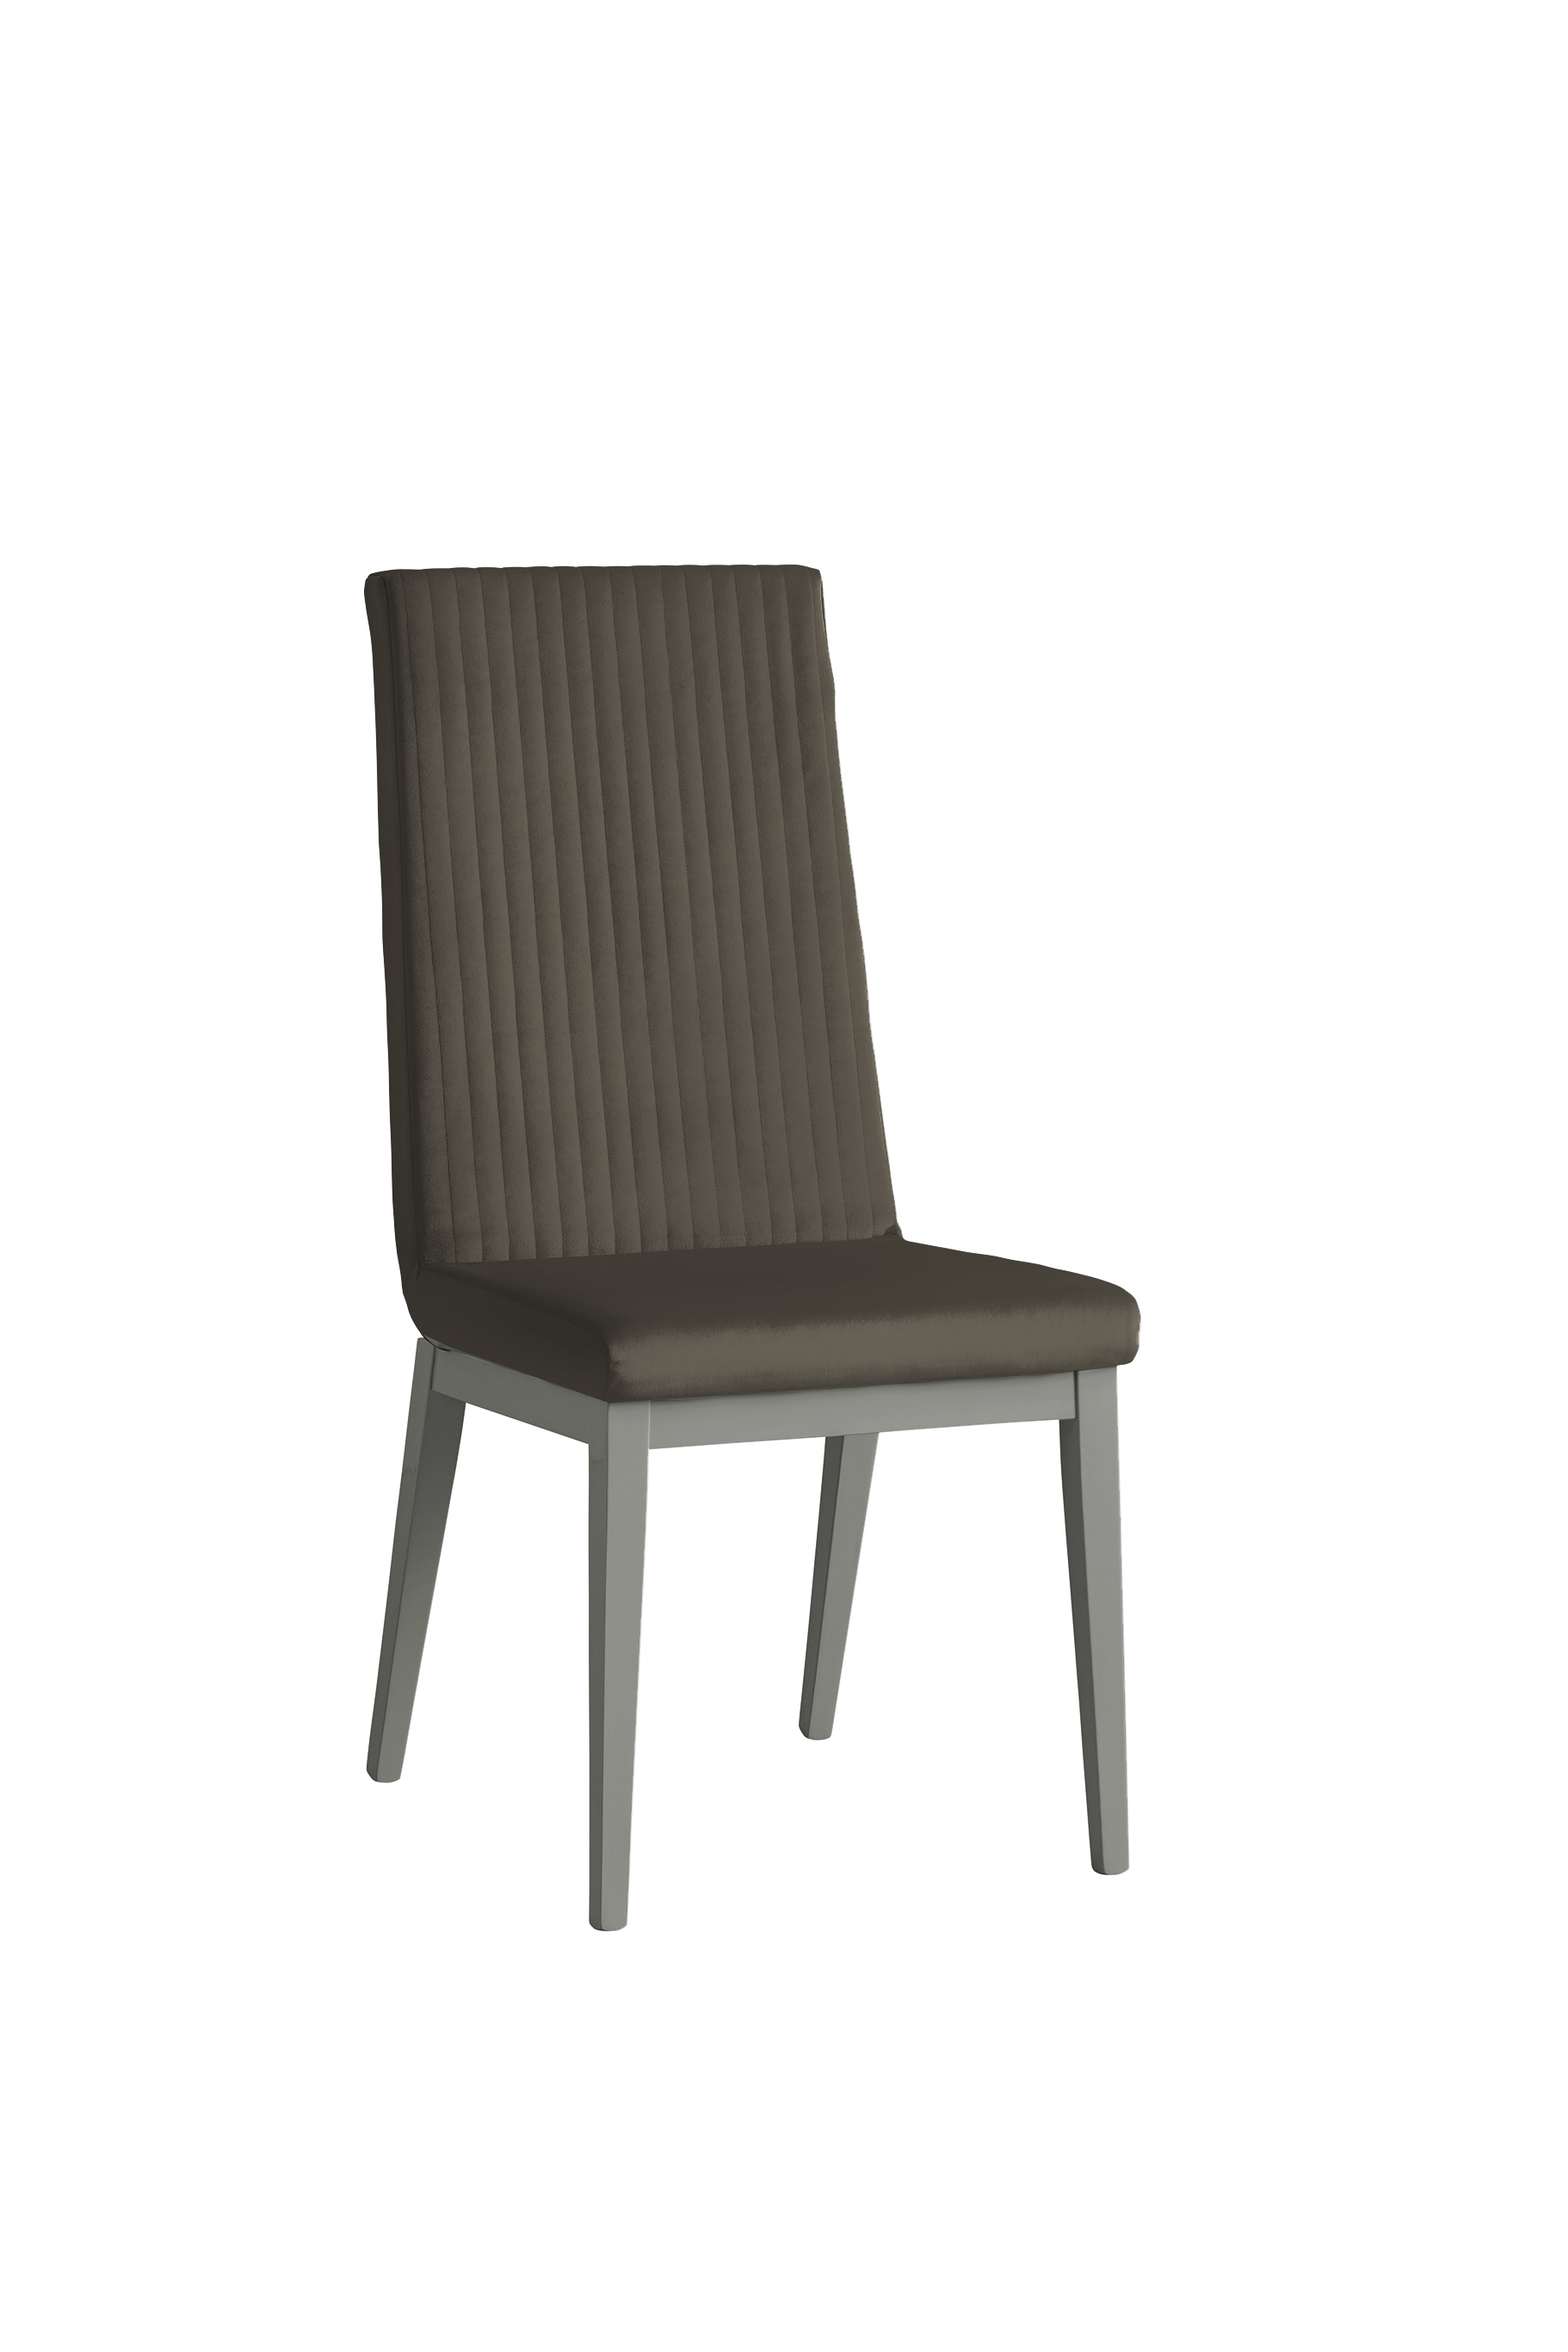 CHAIR FLUTE STRIPE FRONT_time-800